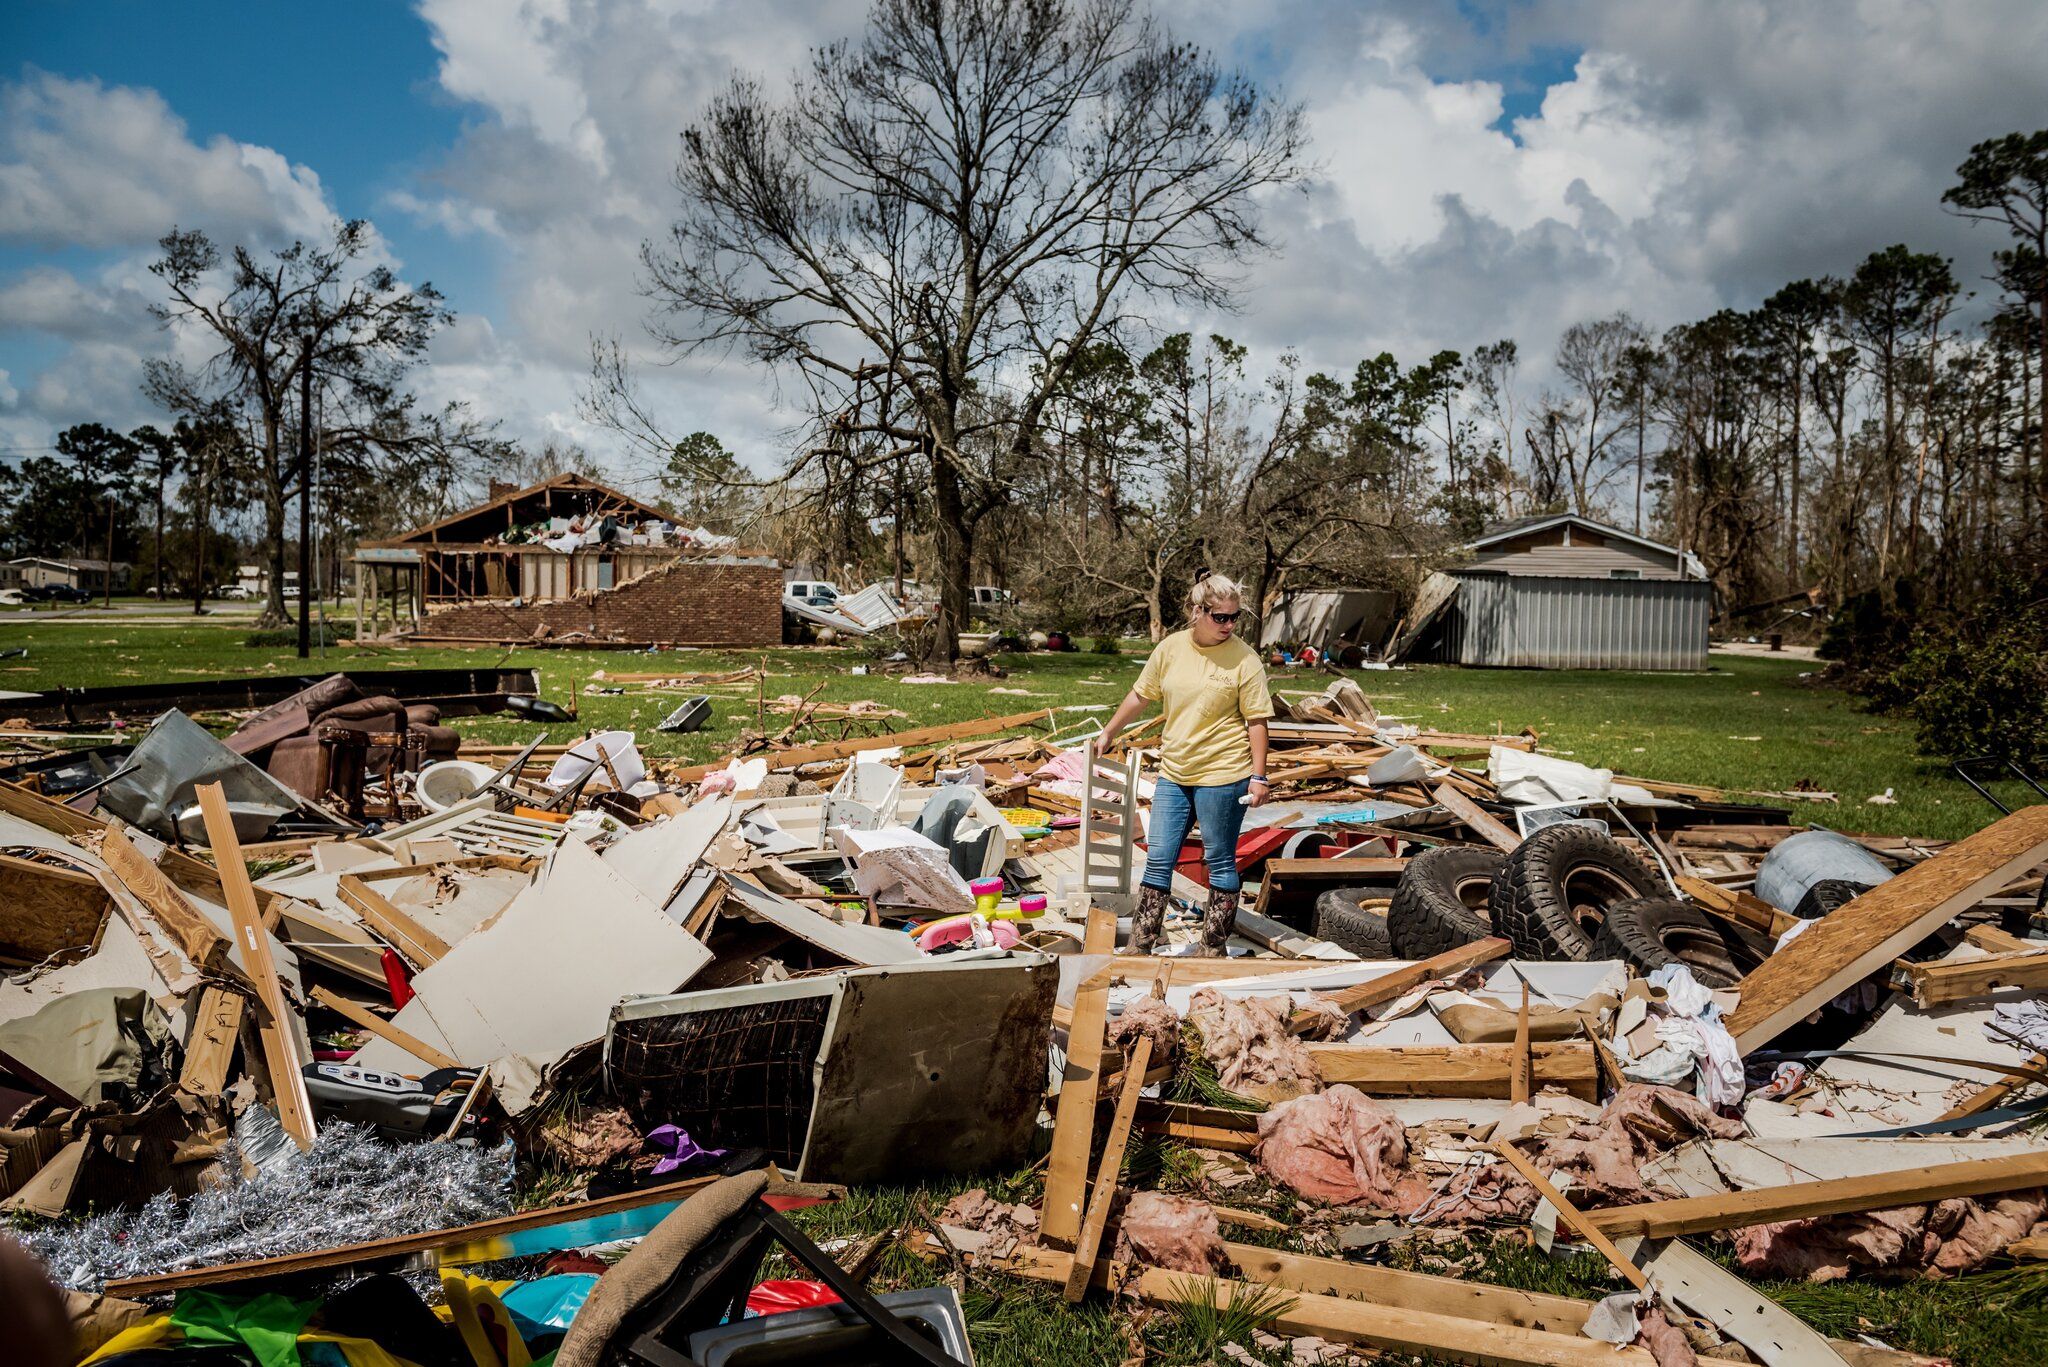 LAKE CHARLES, LA. Cassidy Plaisance surveying what was left of her friend’s home after Hurricane Laura. Image by Meridith Kohut. United States, 2020.